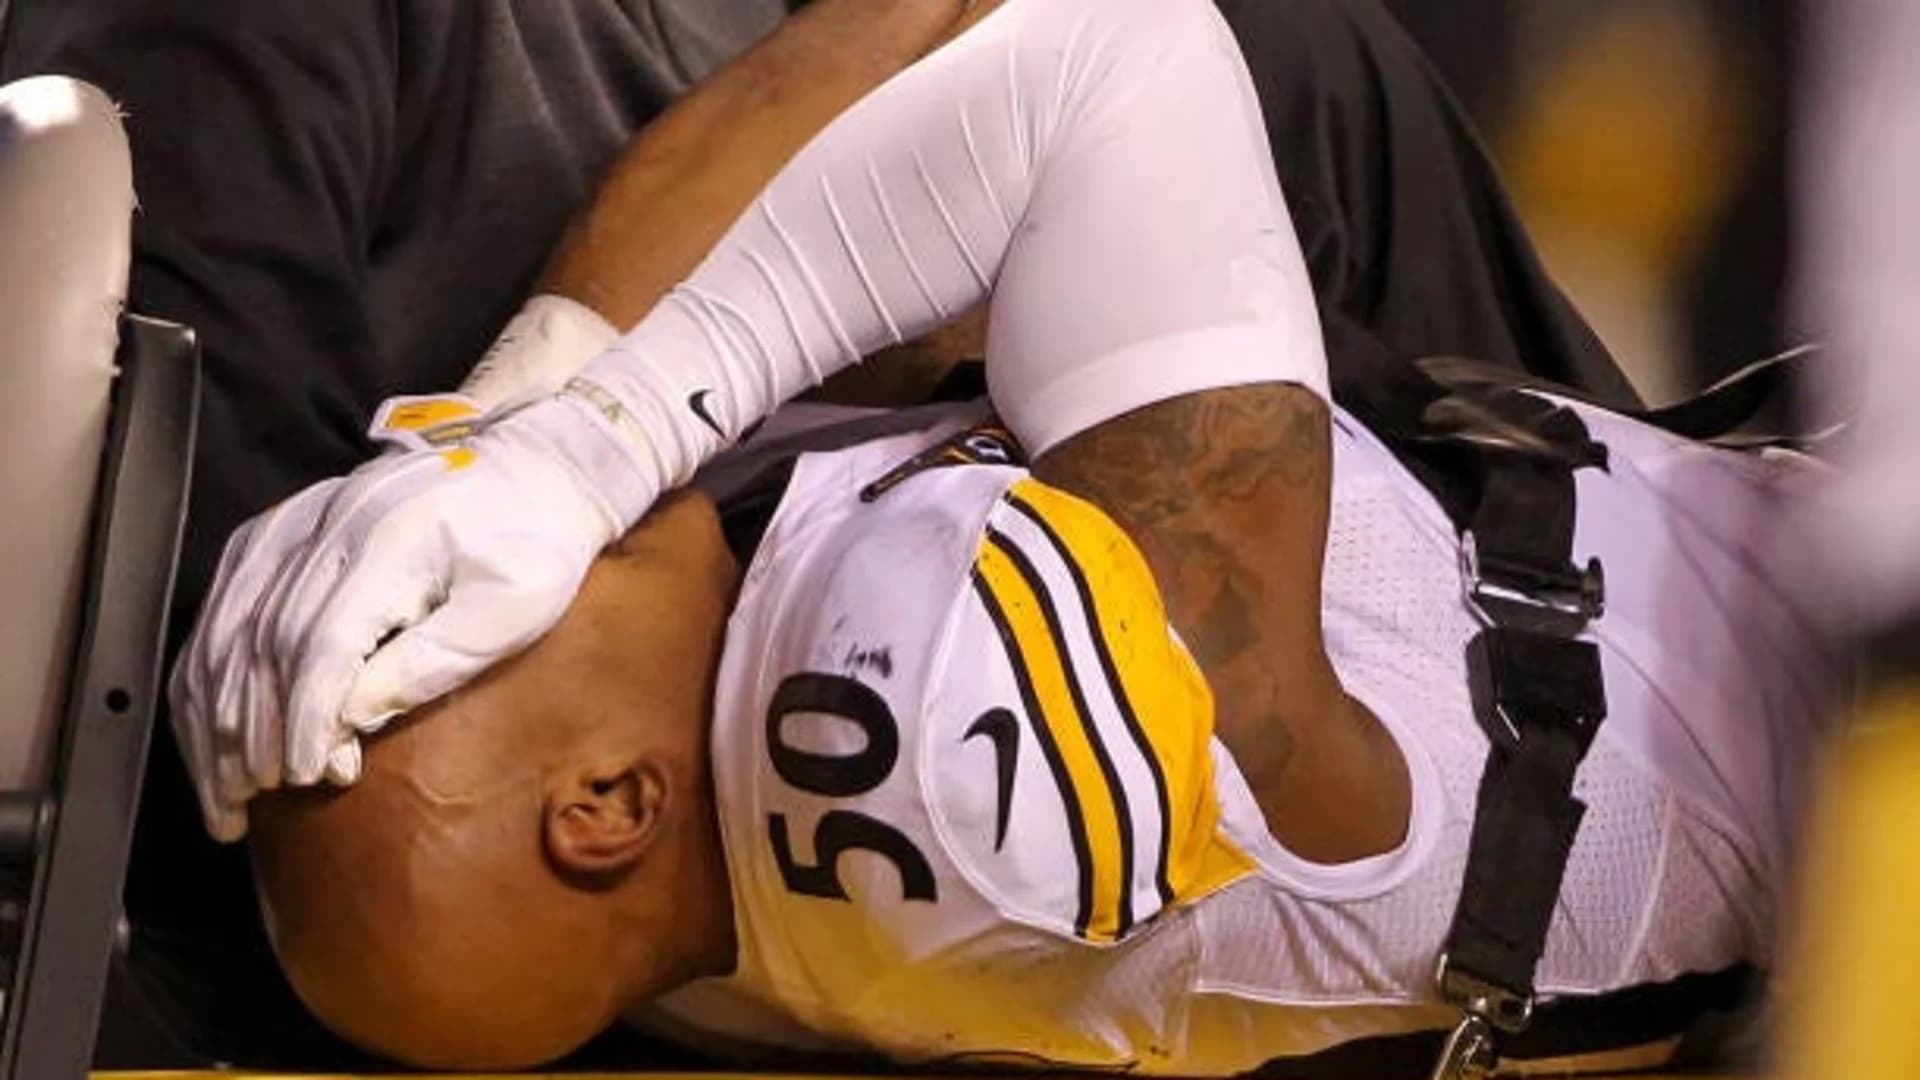 Steelers LB Shazier remains in hospital with back injury